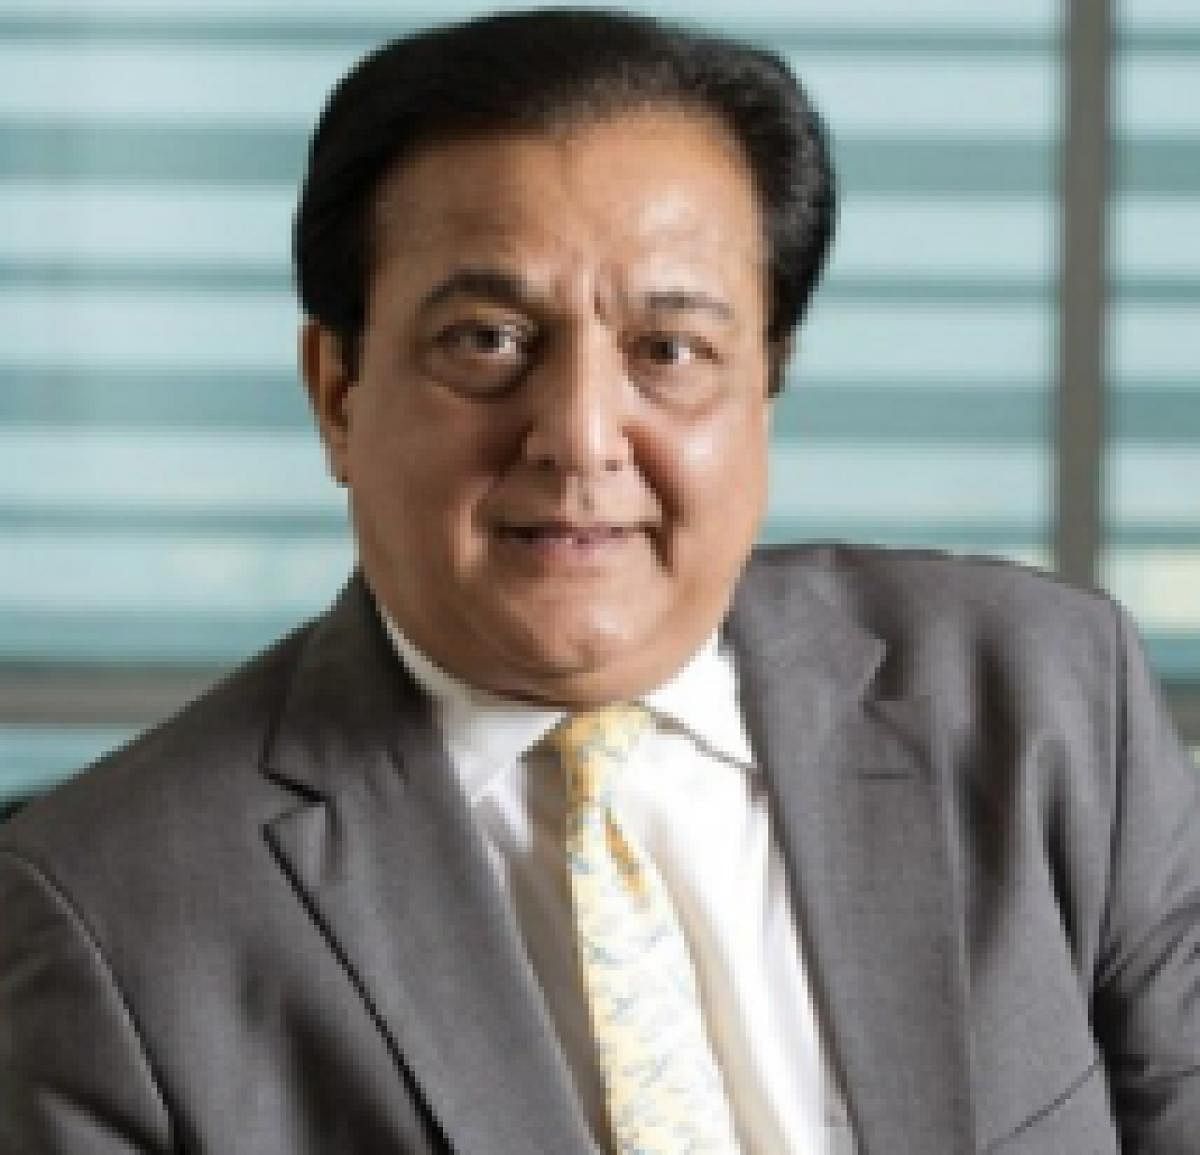 Rana Kapoor's term was curtailed by RBI due to a slew of concerns, including poor governance and loan practices. (File Photo)